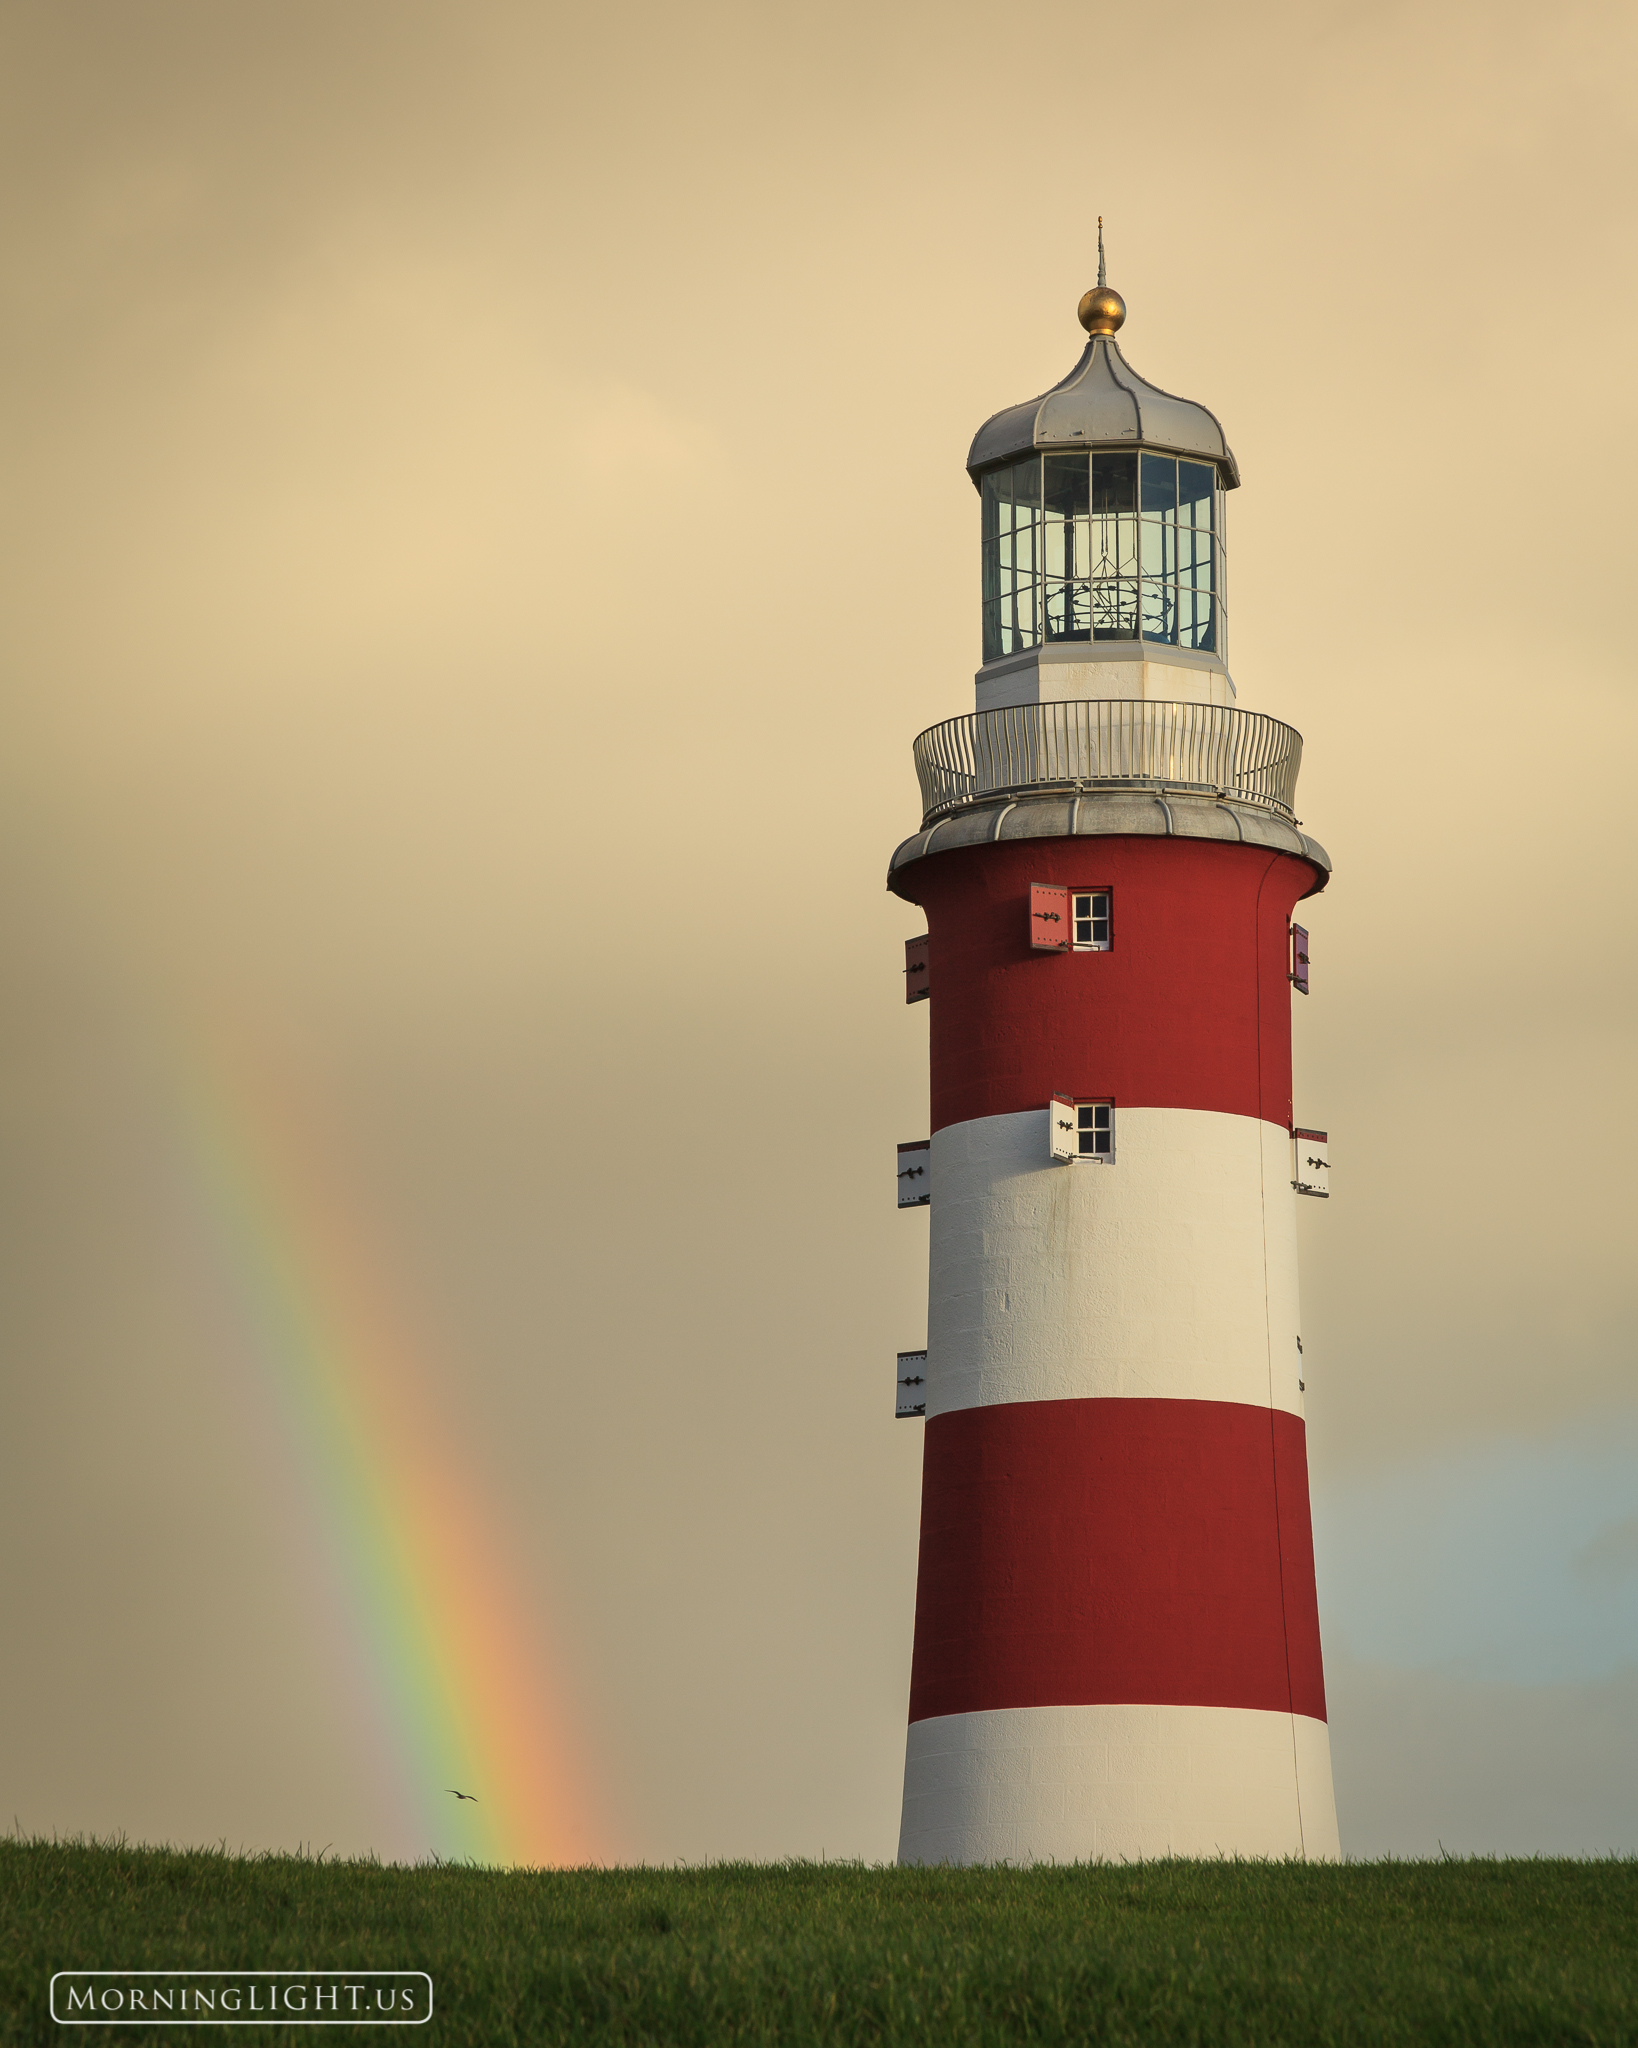 Following a rain storm the sun came out briefly creating a wonderful rainbow beside Smeaton's Tower, an old lighthouse along...